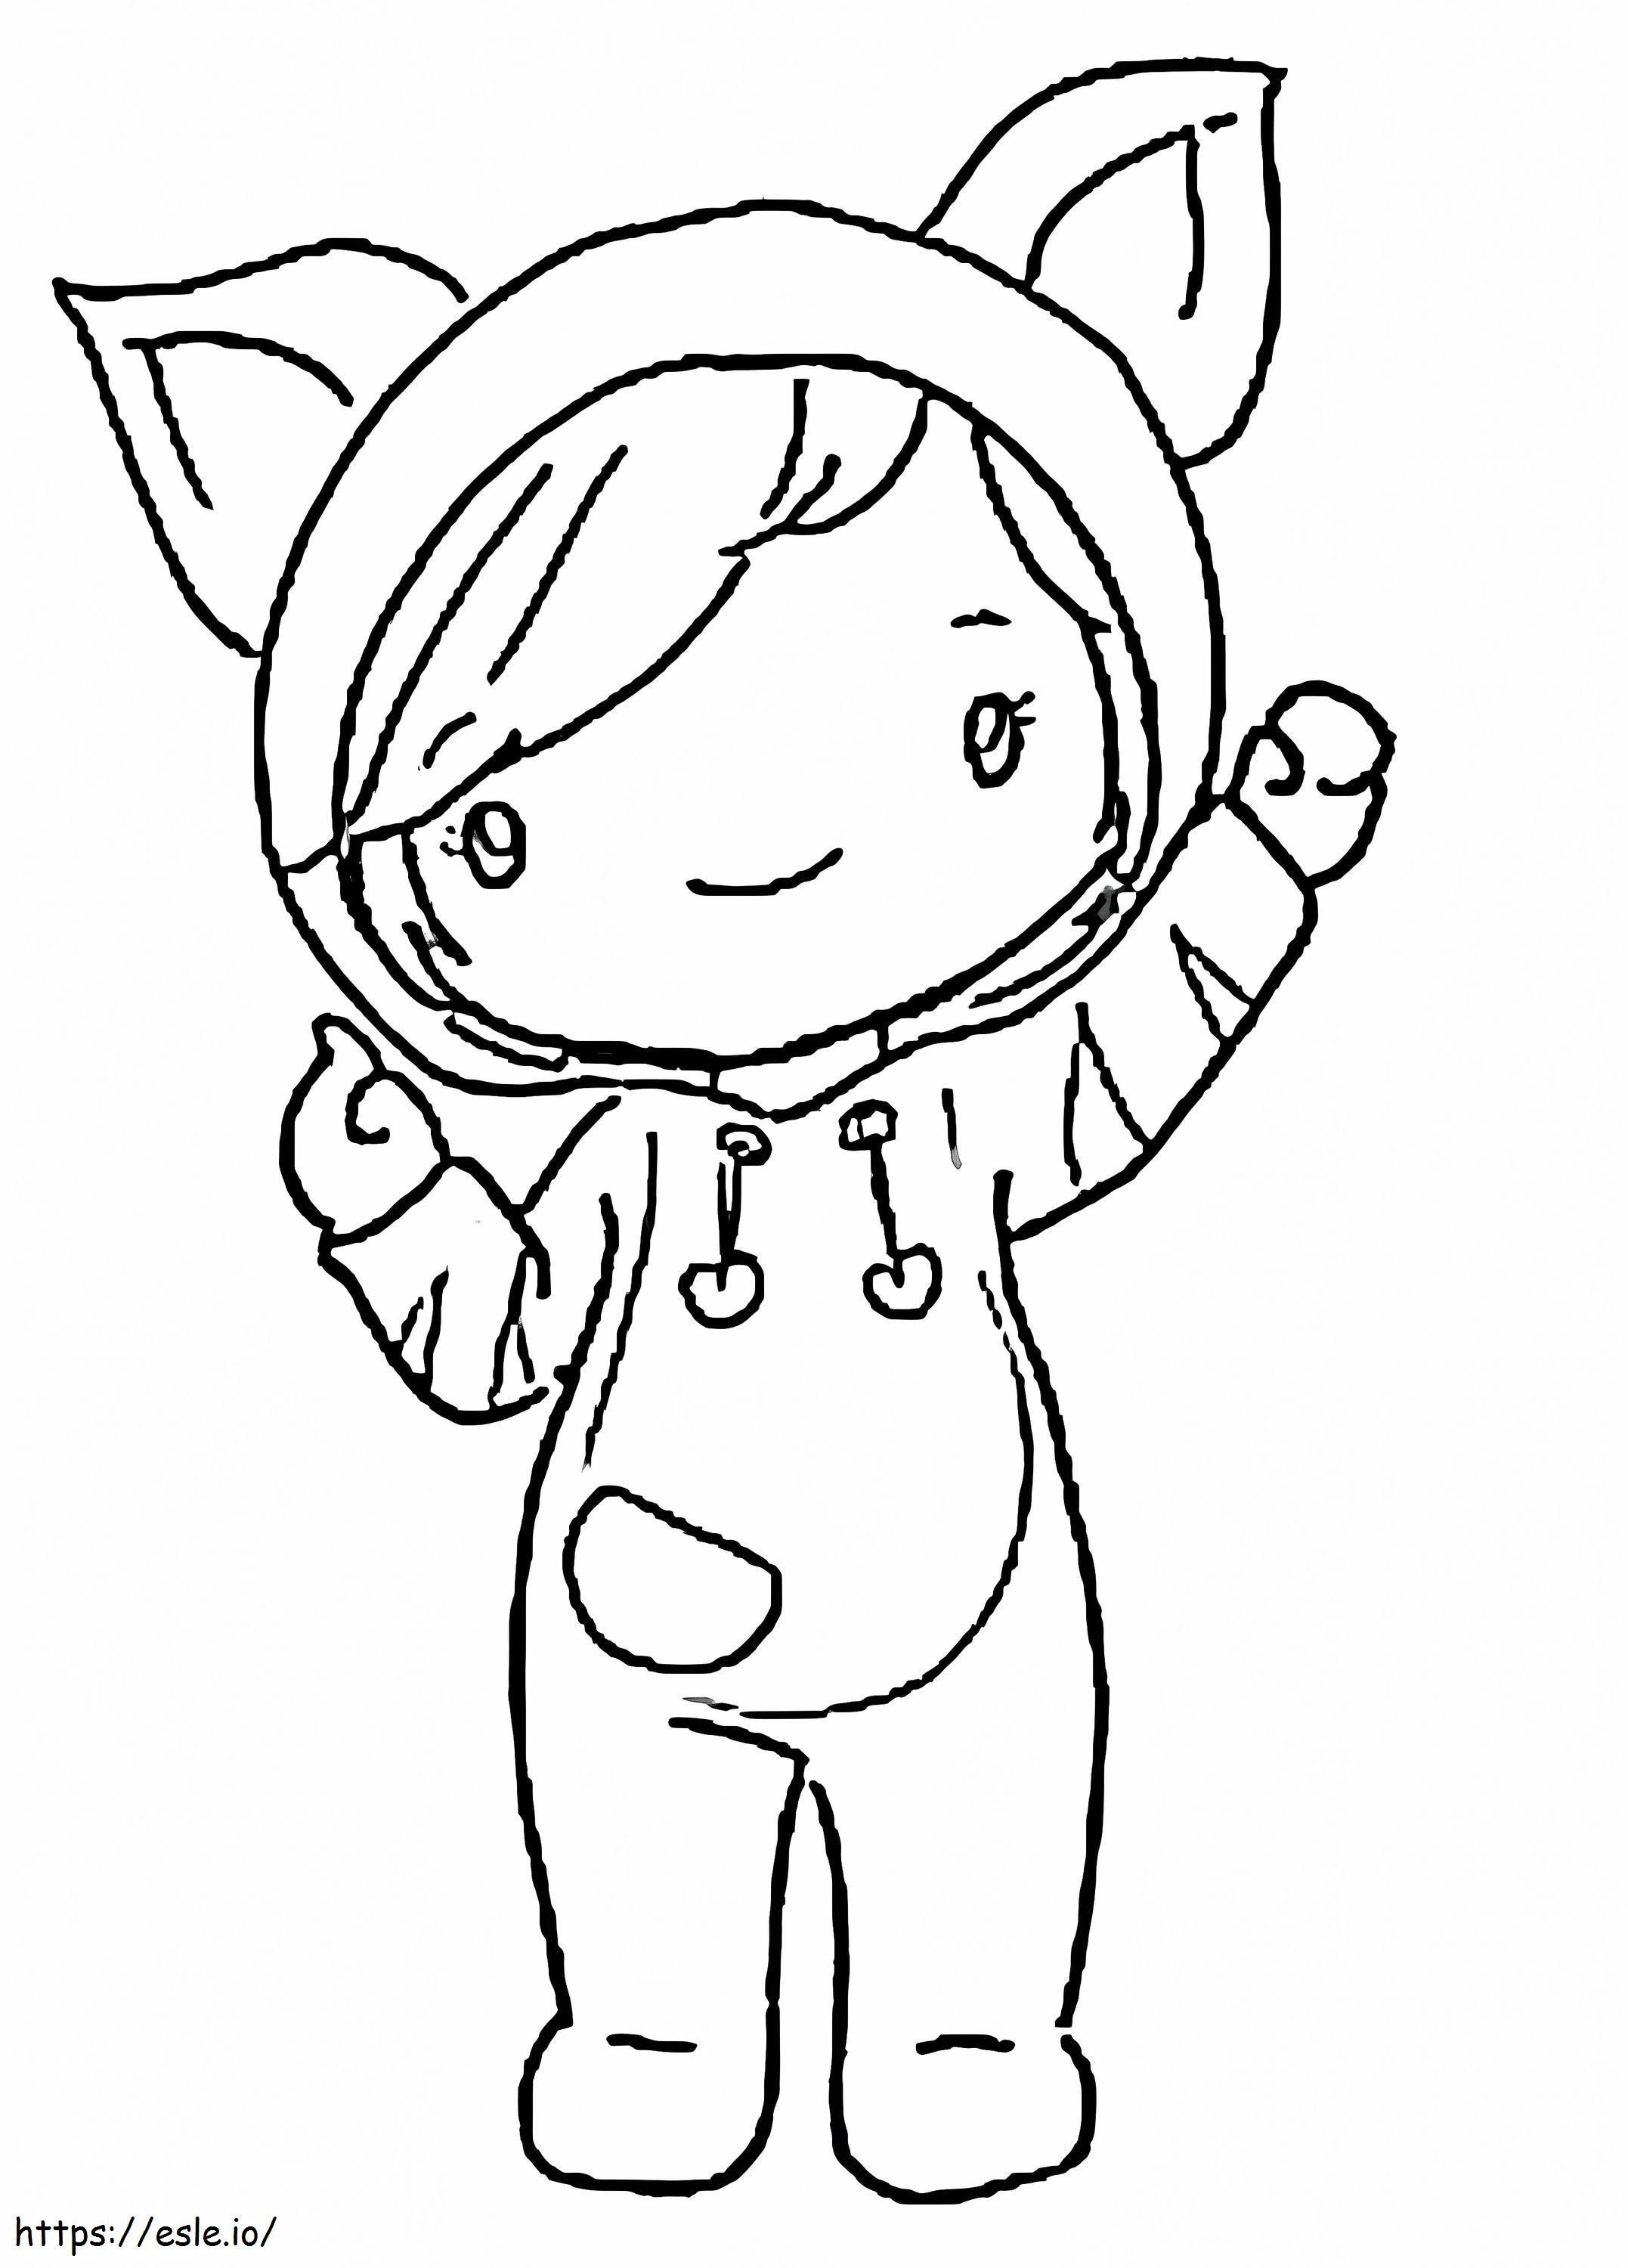 Lovely Ava coloring page